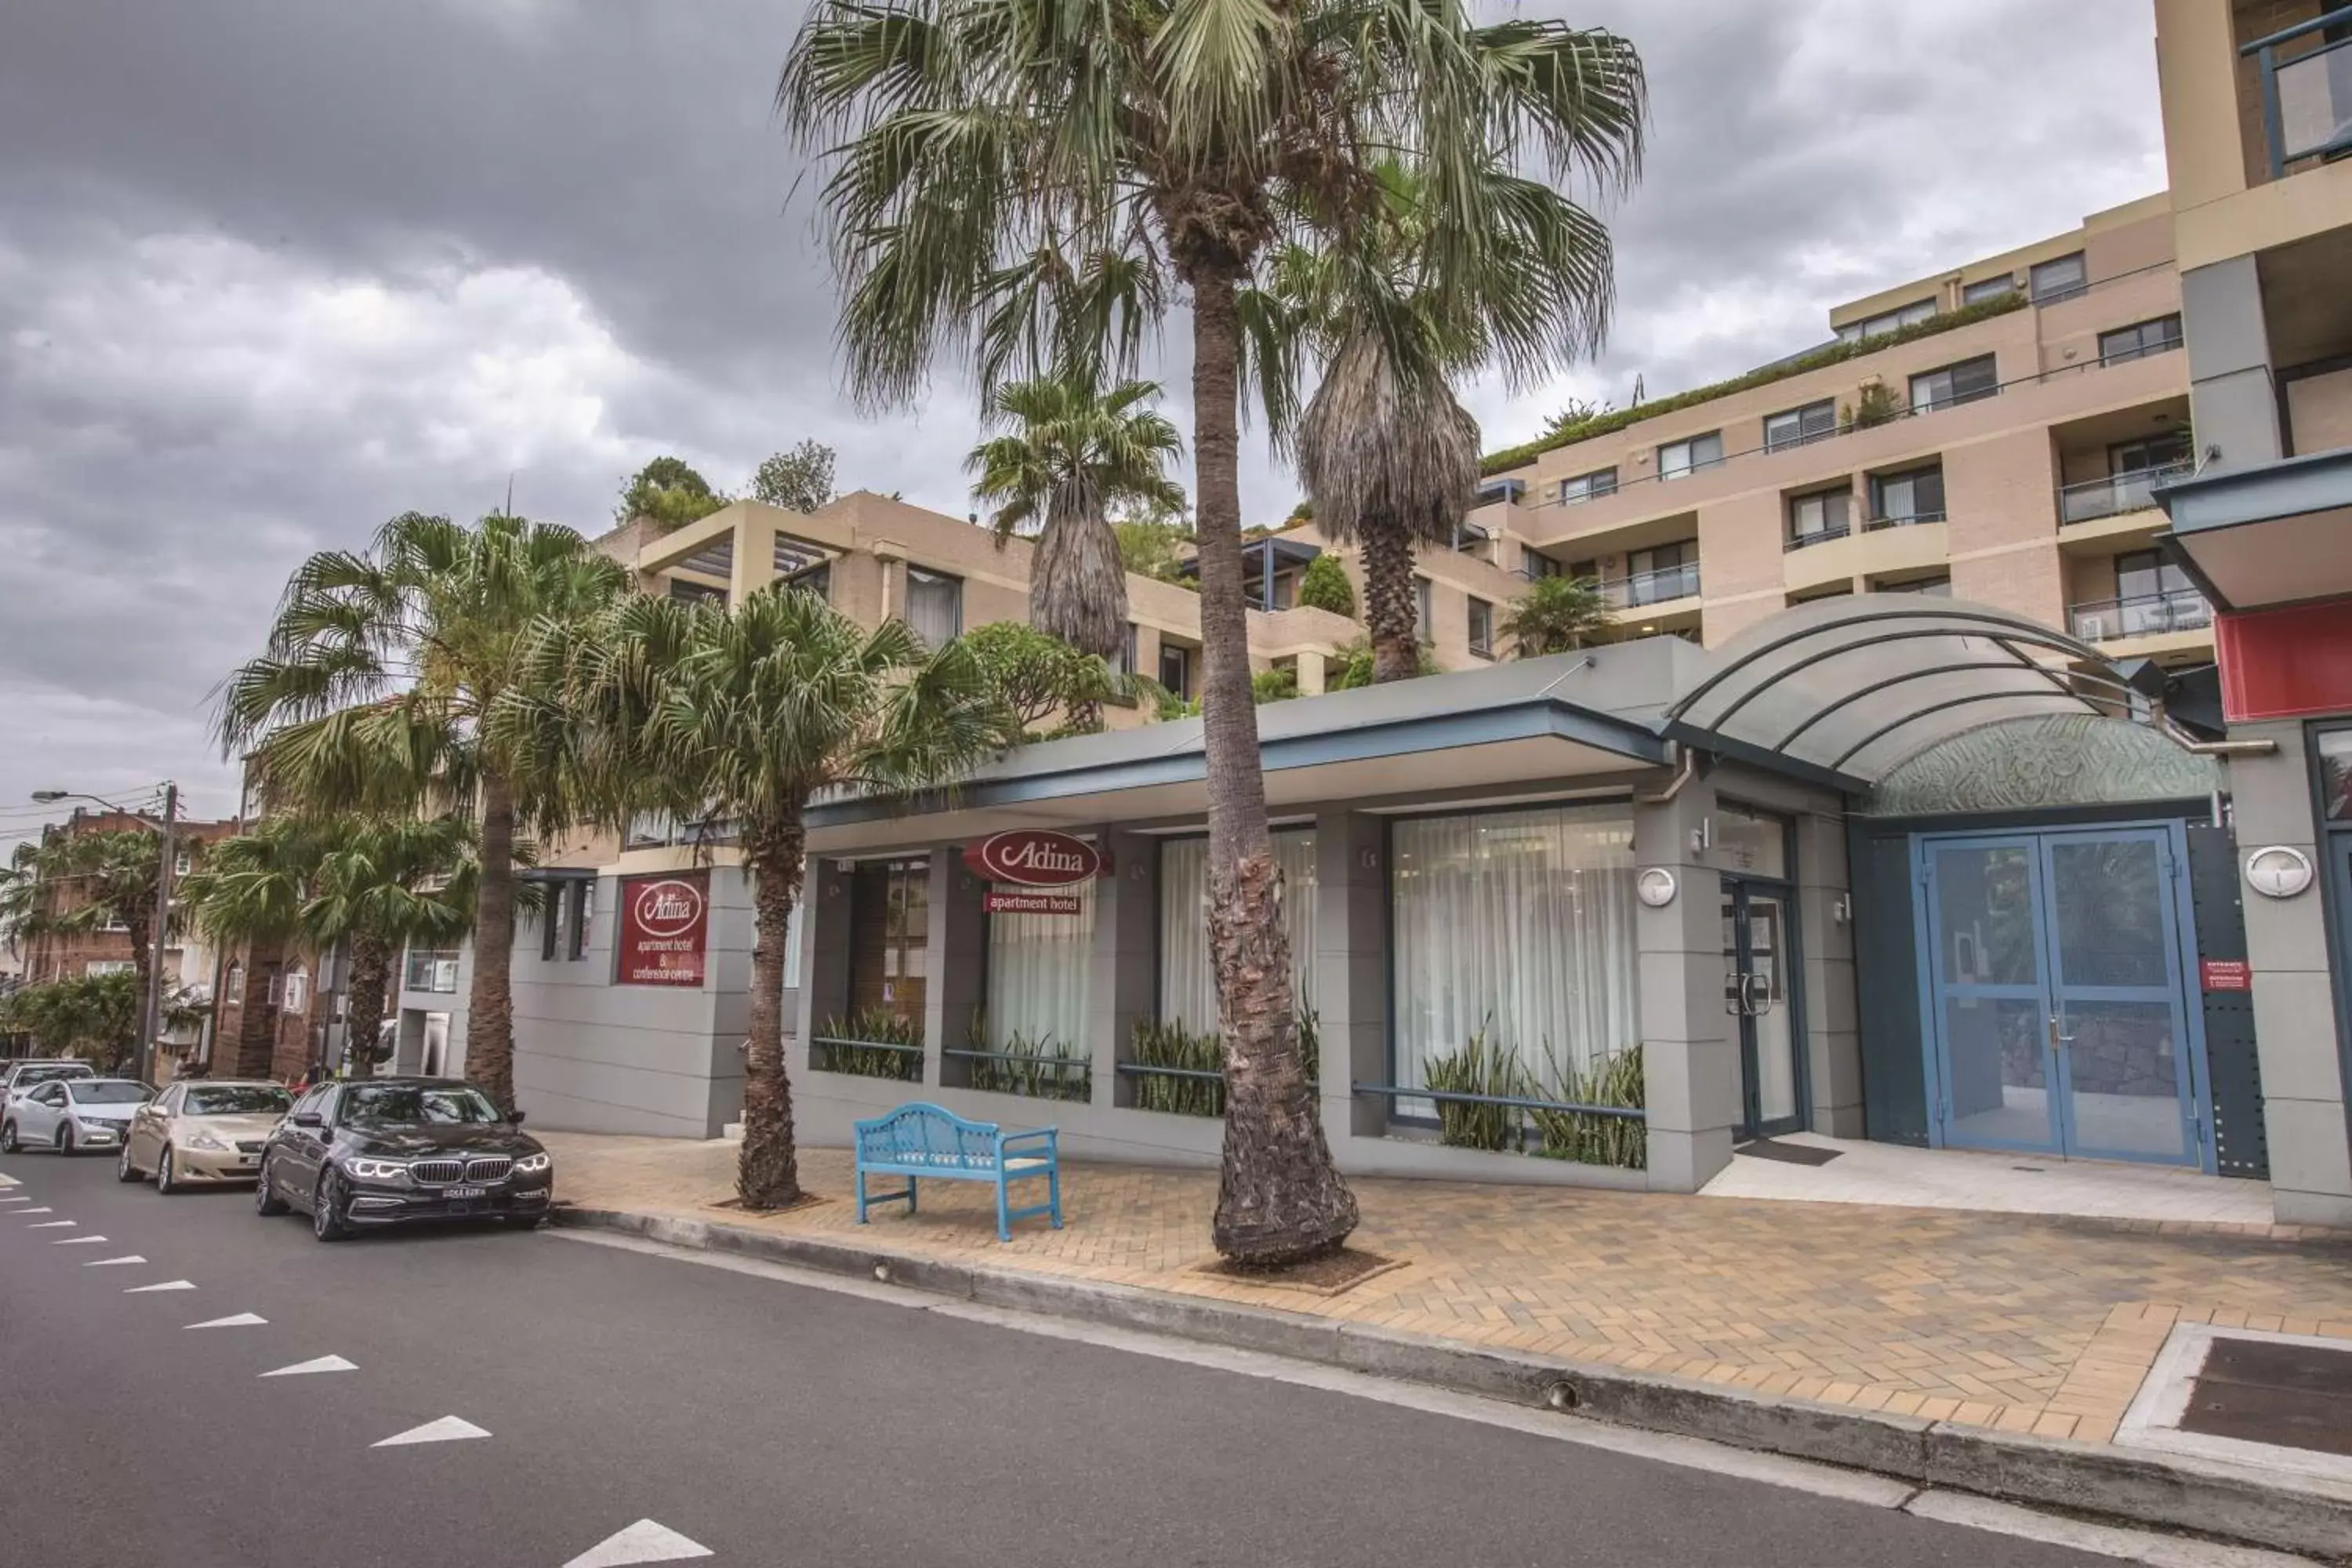 Property Building in Adina Apartment Hotel Coogee Sydney